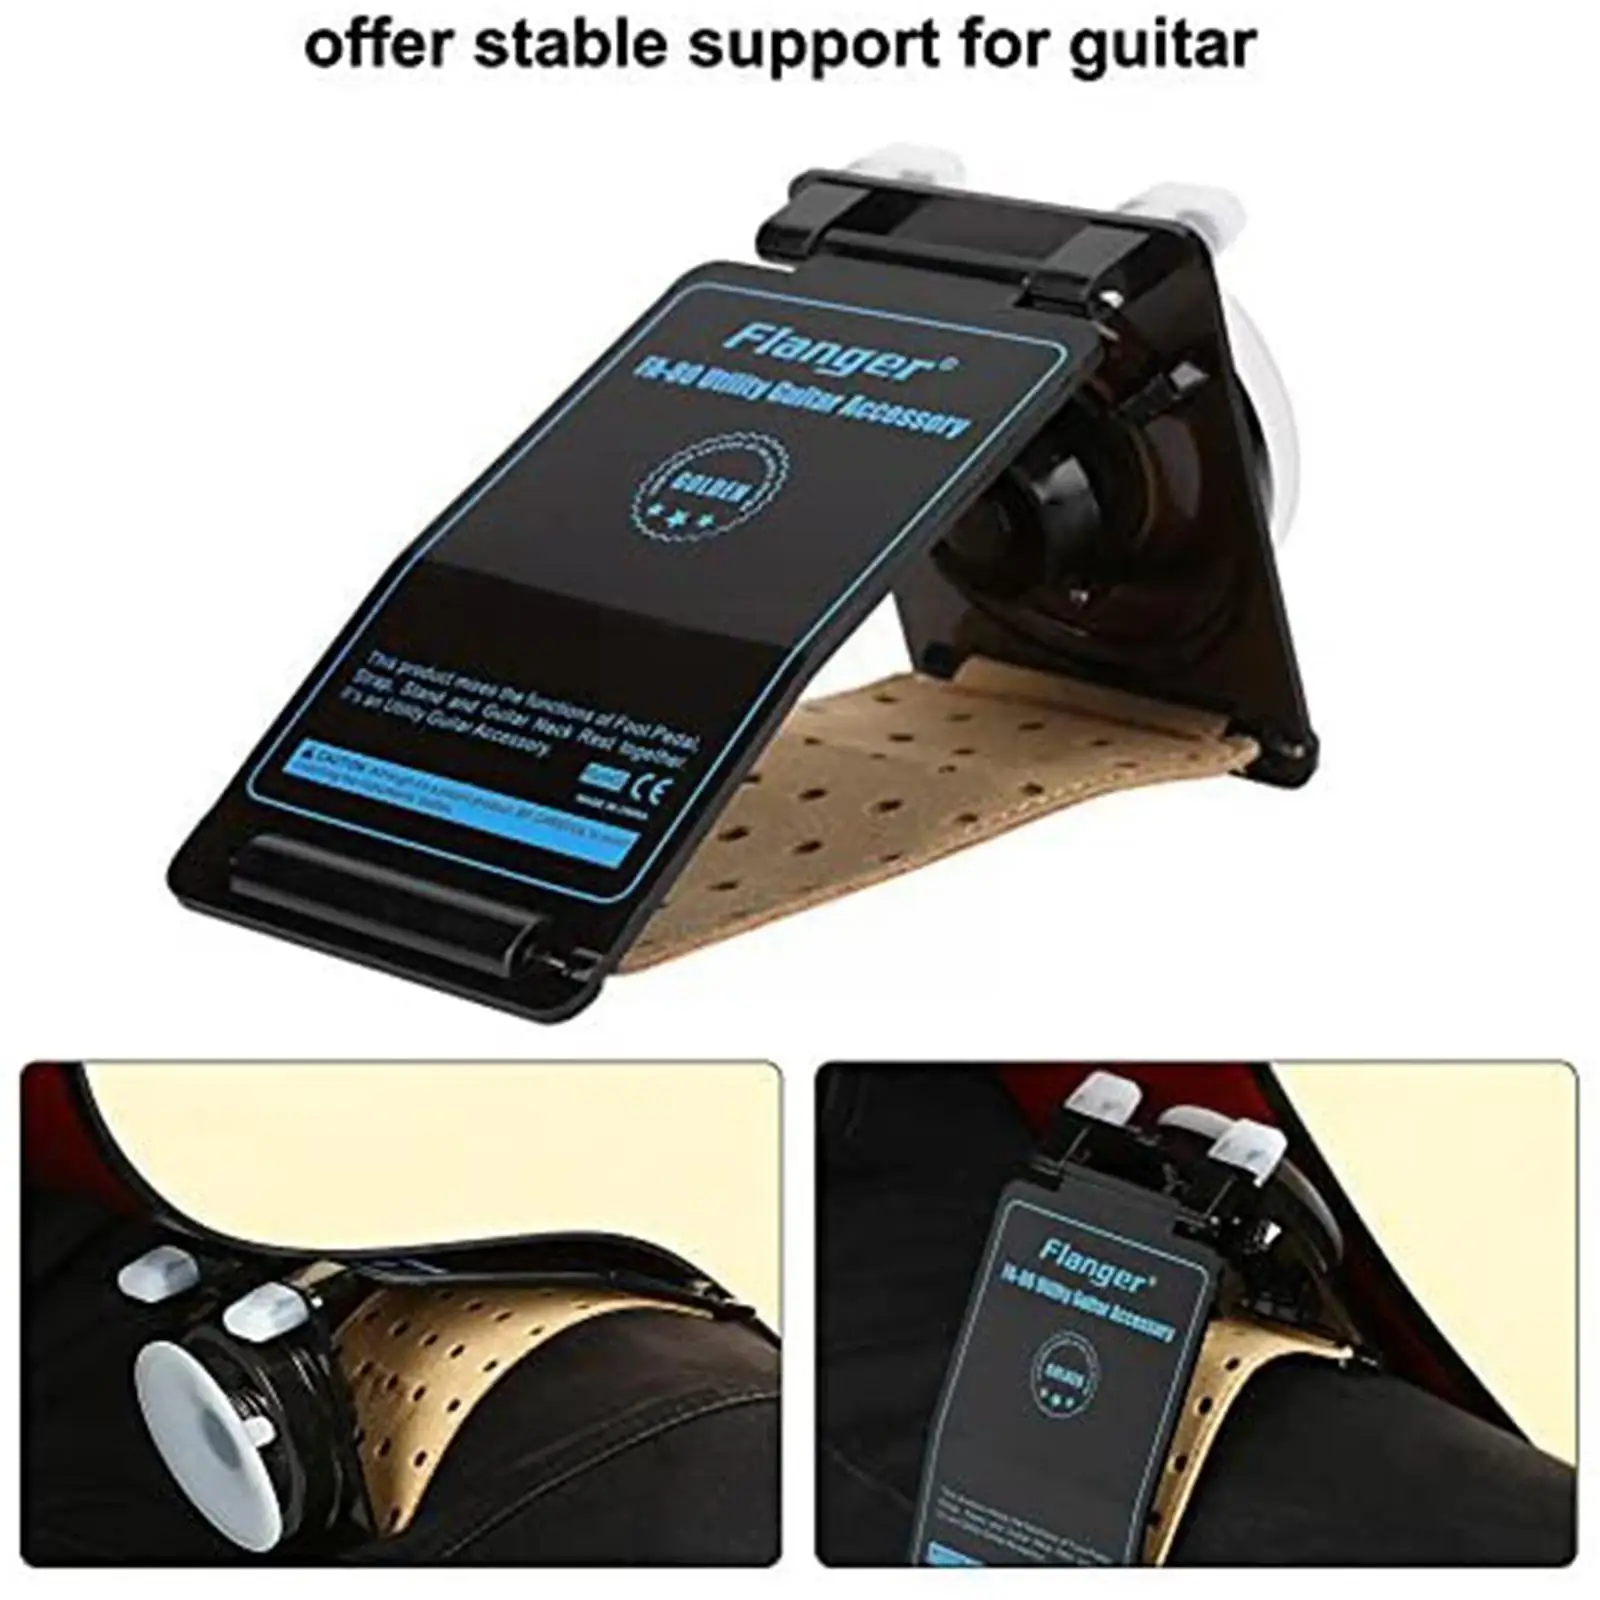 Acoustic Guitar Piano Holder Flanger FA-80 Multi-function Playing Replacement Bracket Support Guitar Fixed Auxiliary Pedal D1U9